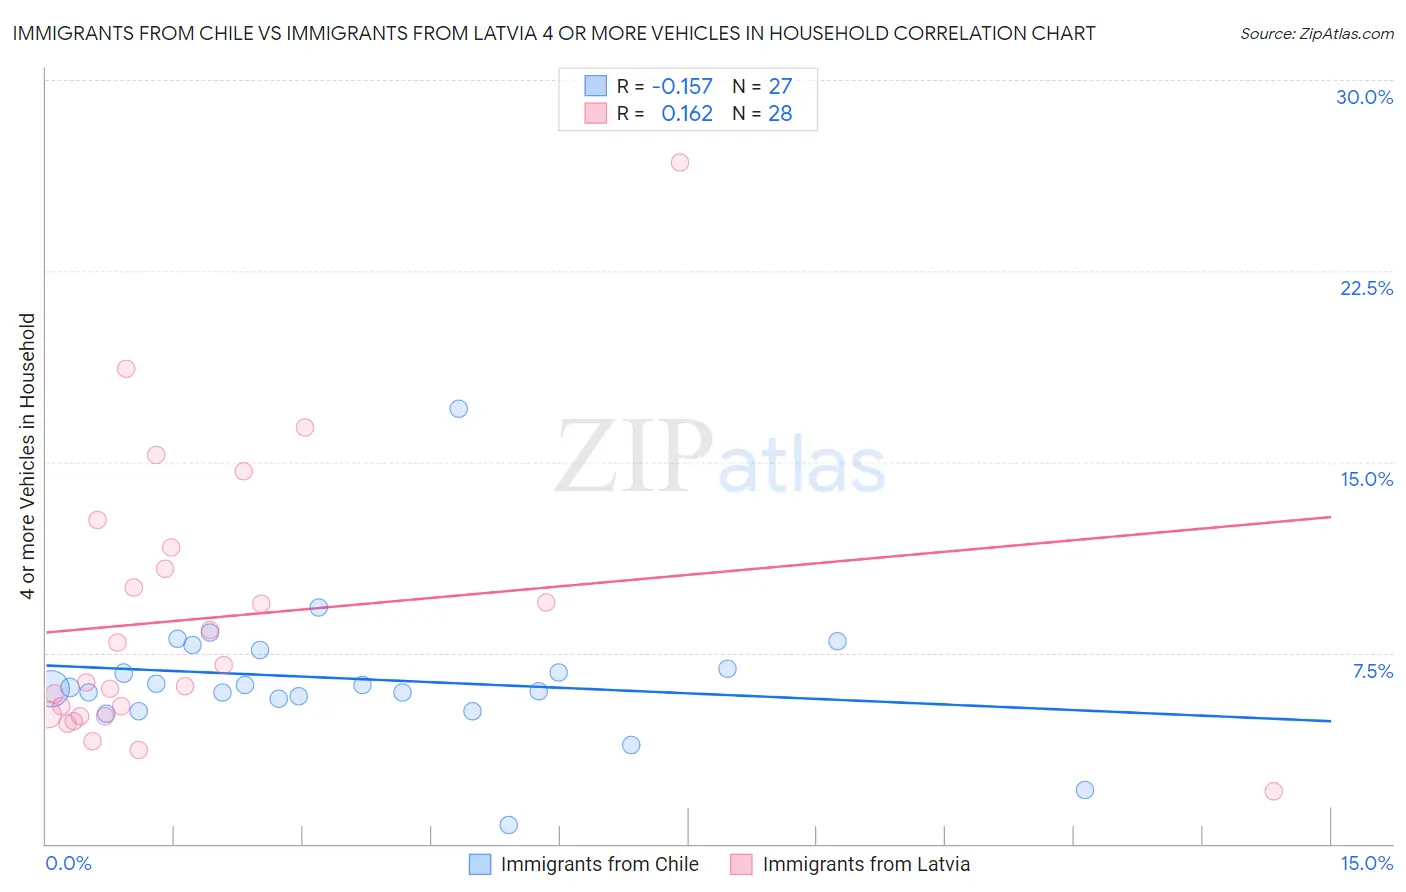 Immigrants from Chile vs Immigrants from Latvia 4 or more Vehicles in Household